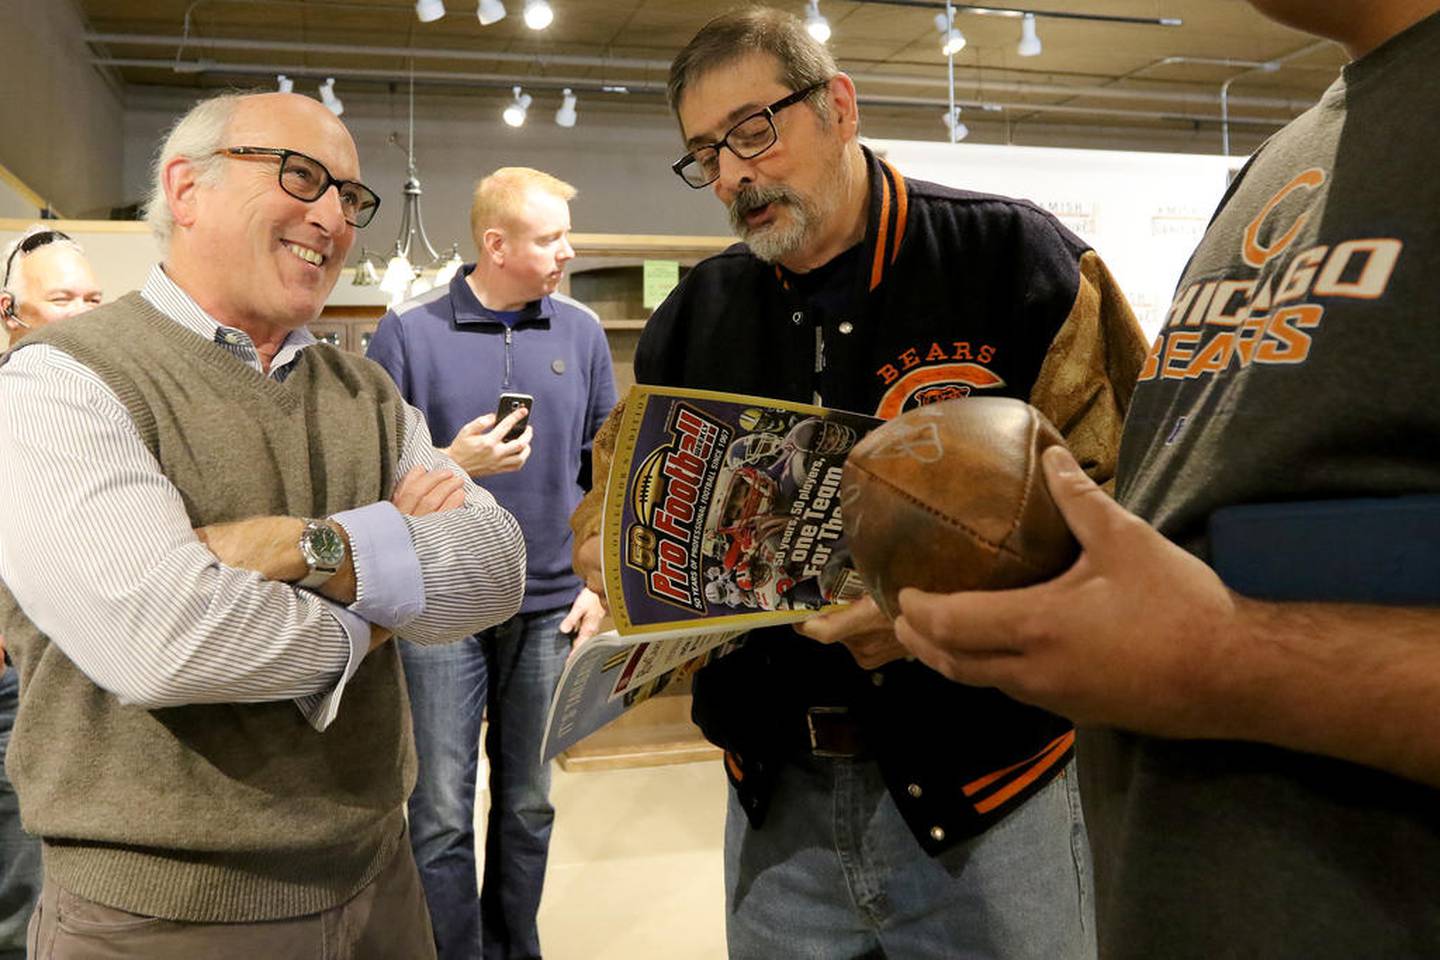 Pro Football Weekly's Hub Arkush talks with Bears fans during an autograph session with Bears Hall of Famer Dan Hampton on Saturday at Amish Furniture Gallery  in Crystal Lake.